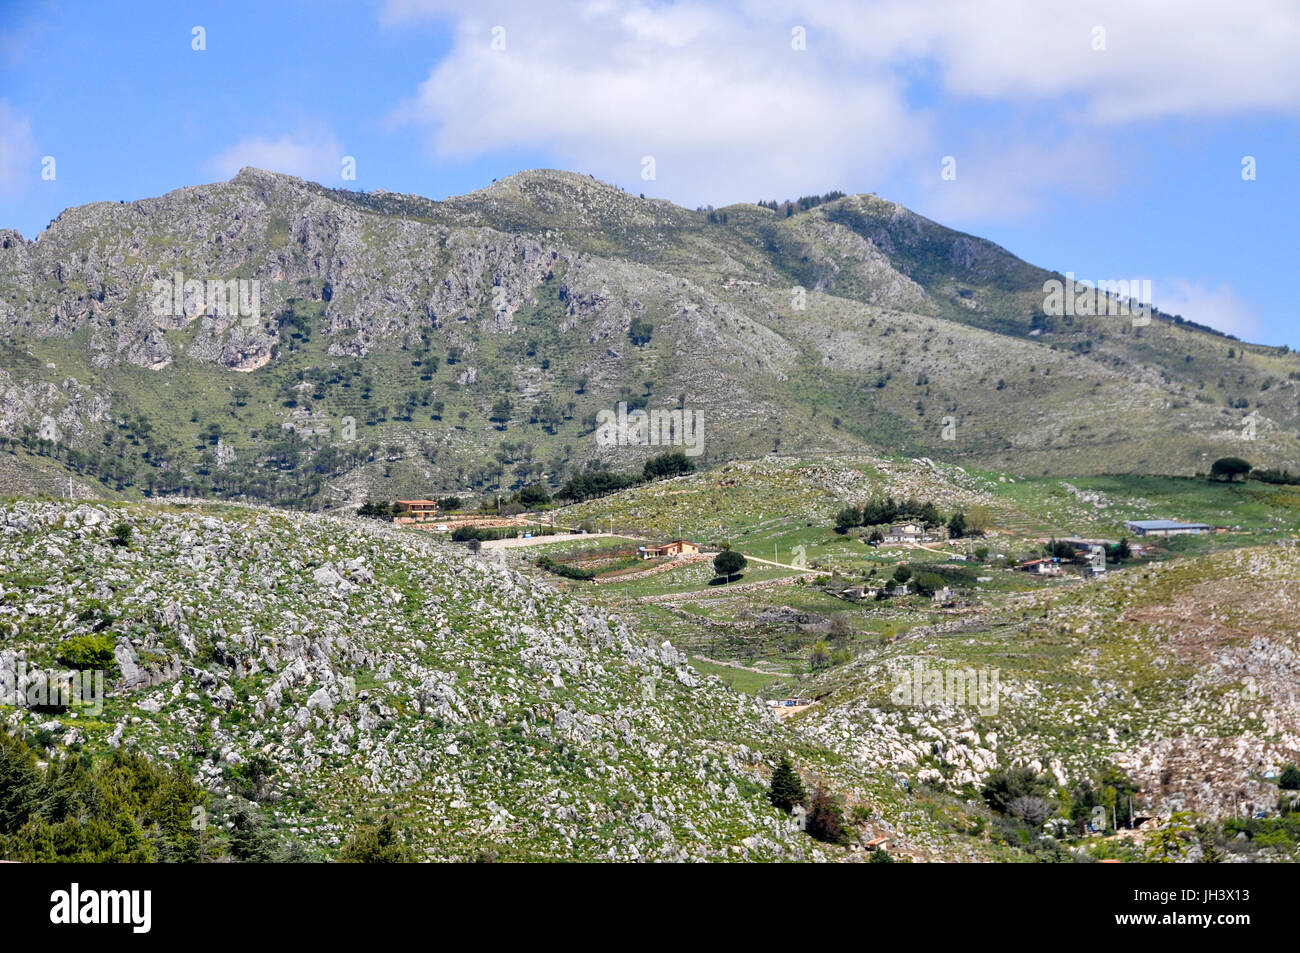 Conca d'Oro valley on the outskirts of Palermo, Sicily, Italy. Stock Photo